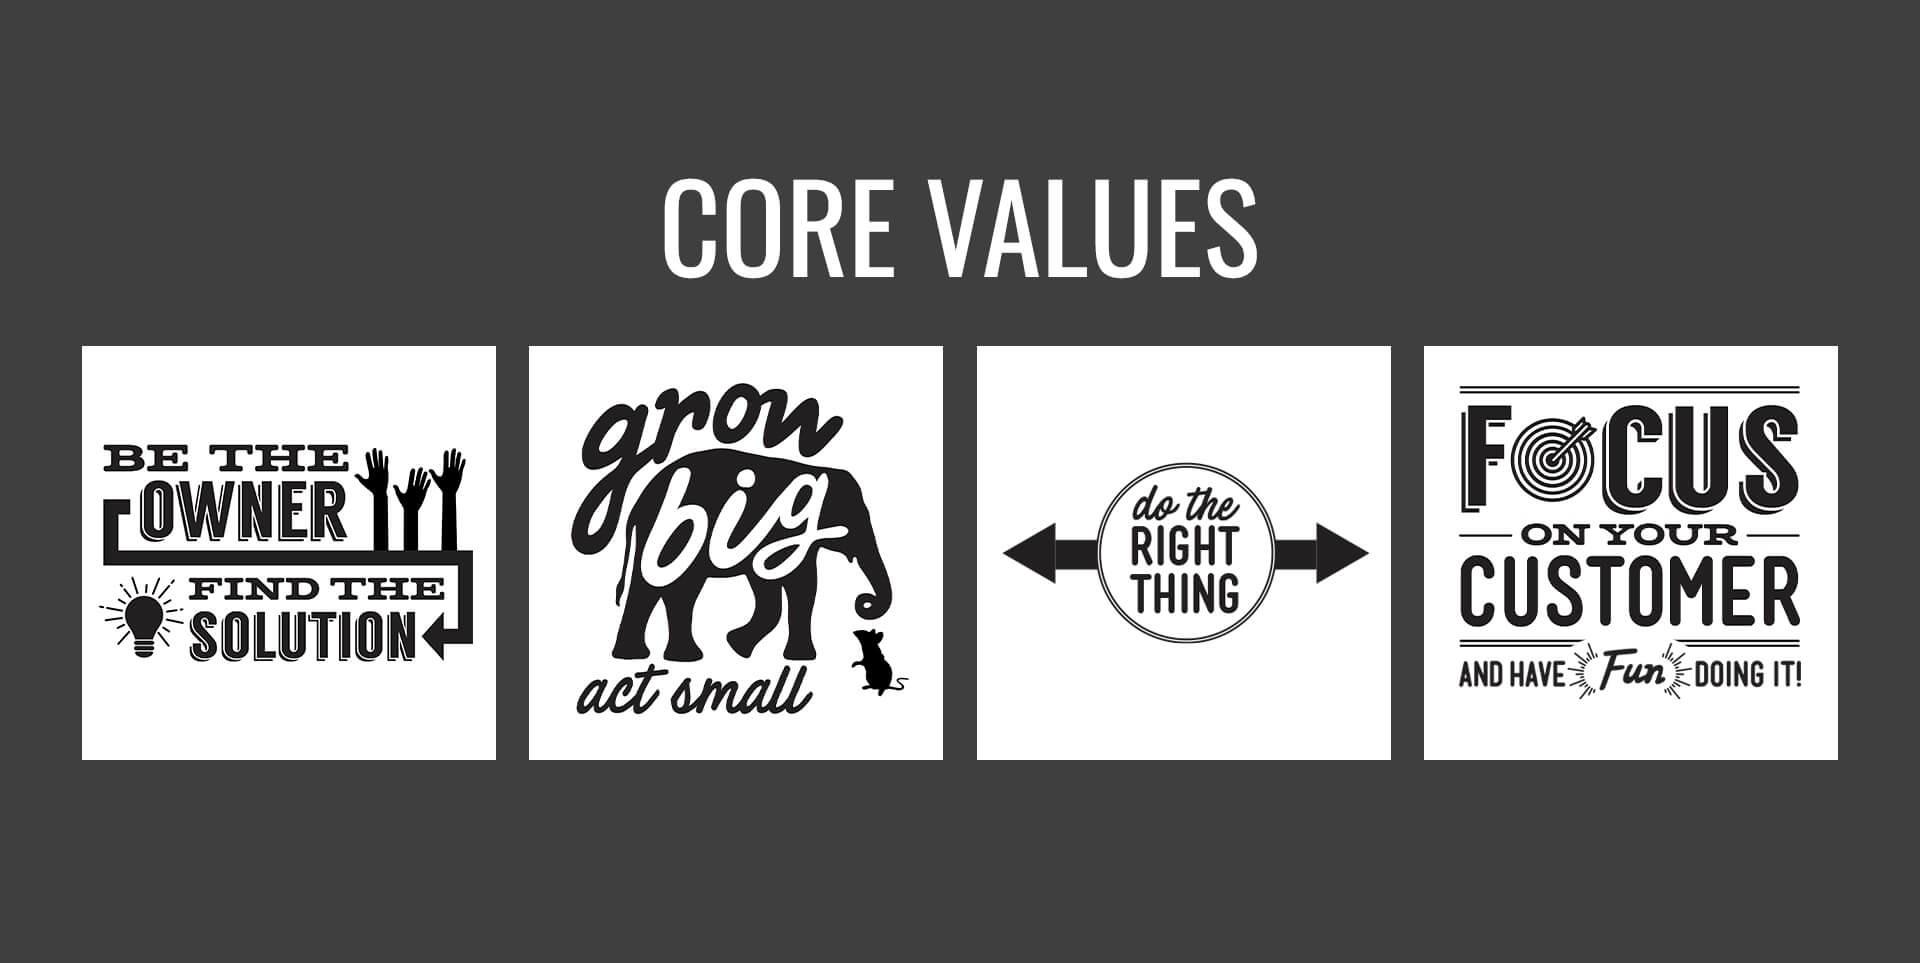 Design House Core Values are Be the Owner, Find the Solution, Grow Big, Act Small, Do the Right Thing, and Focus on Your Customer and Have Fun Doing It!